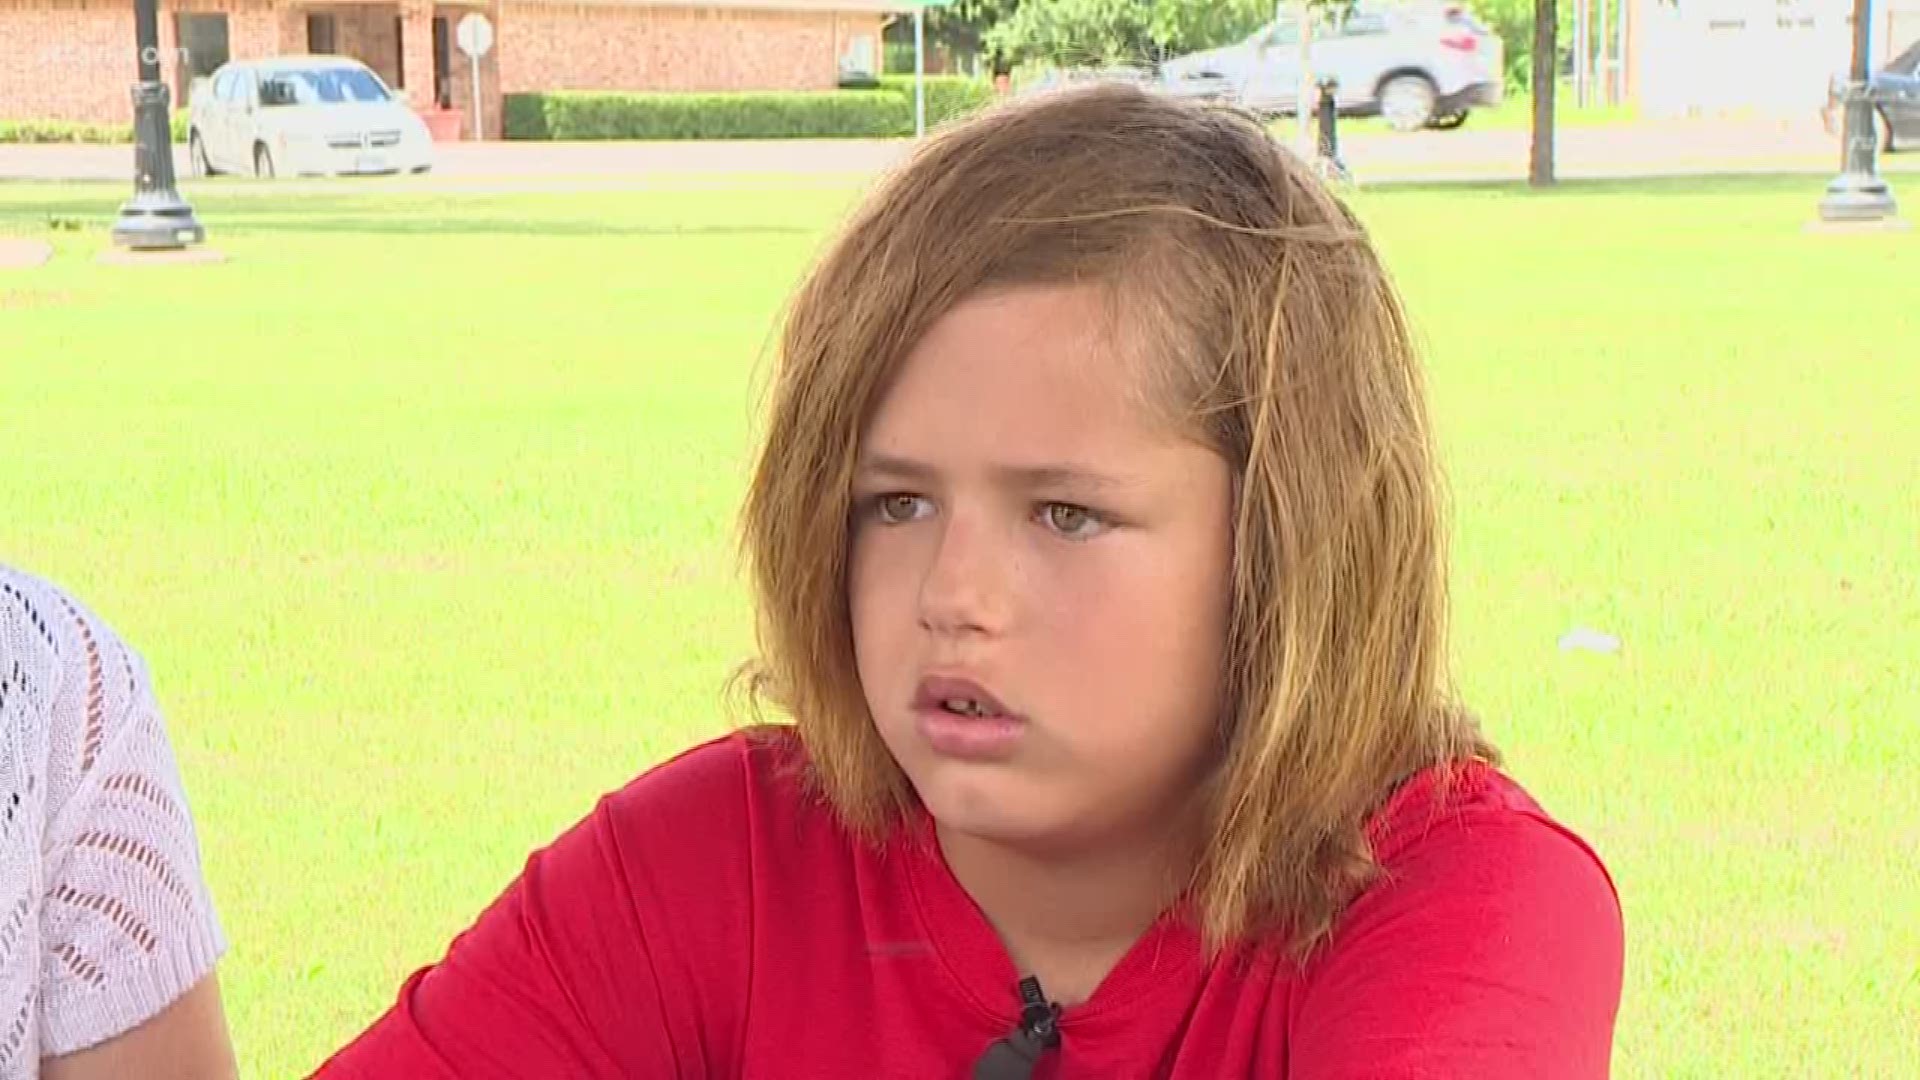 11-year-old Joshua King is fighting a Sanger ISD dress code regulating the length of hair for male students. King says the code is "gender biased and not fair to everyone."